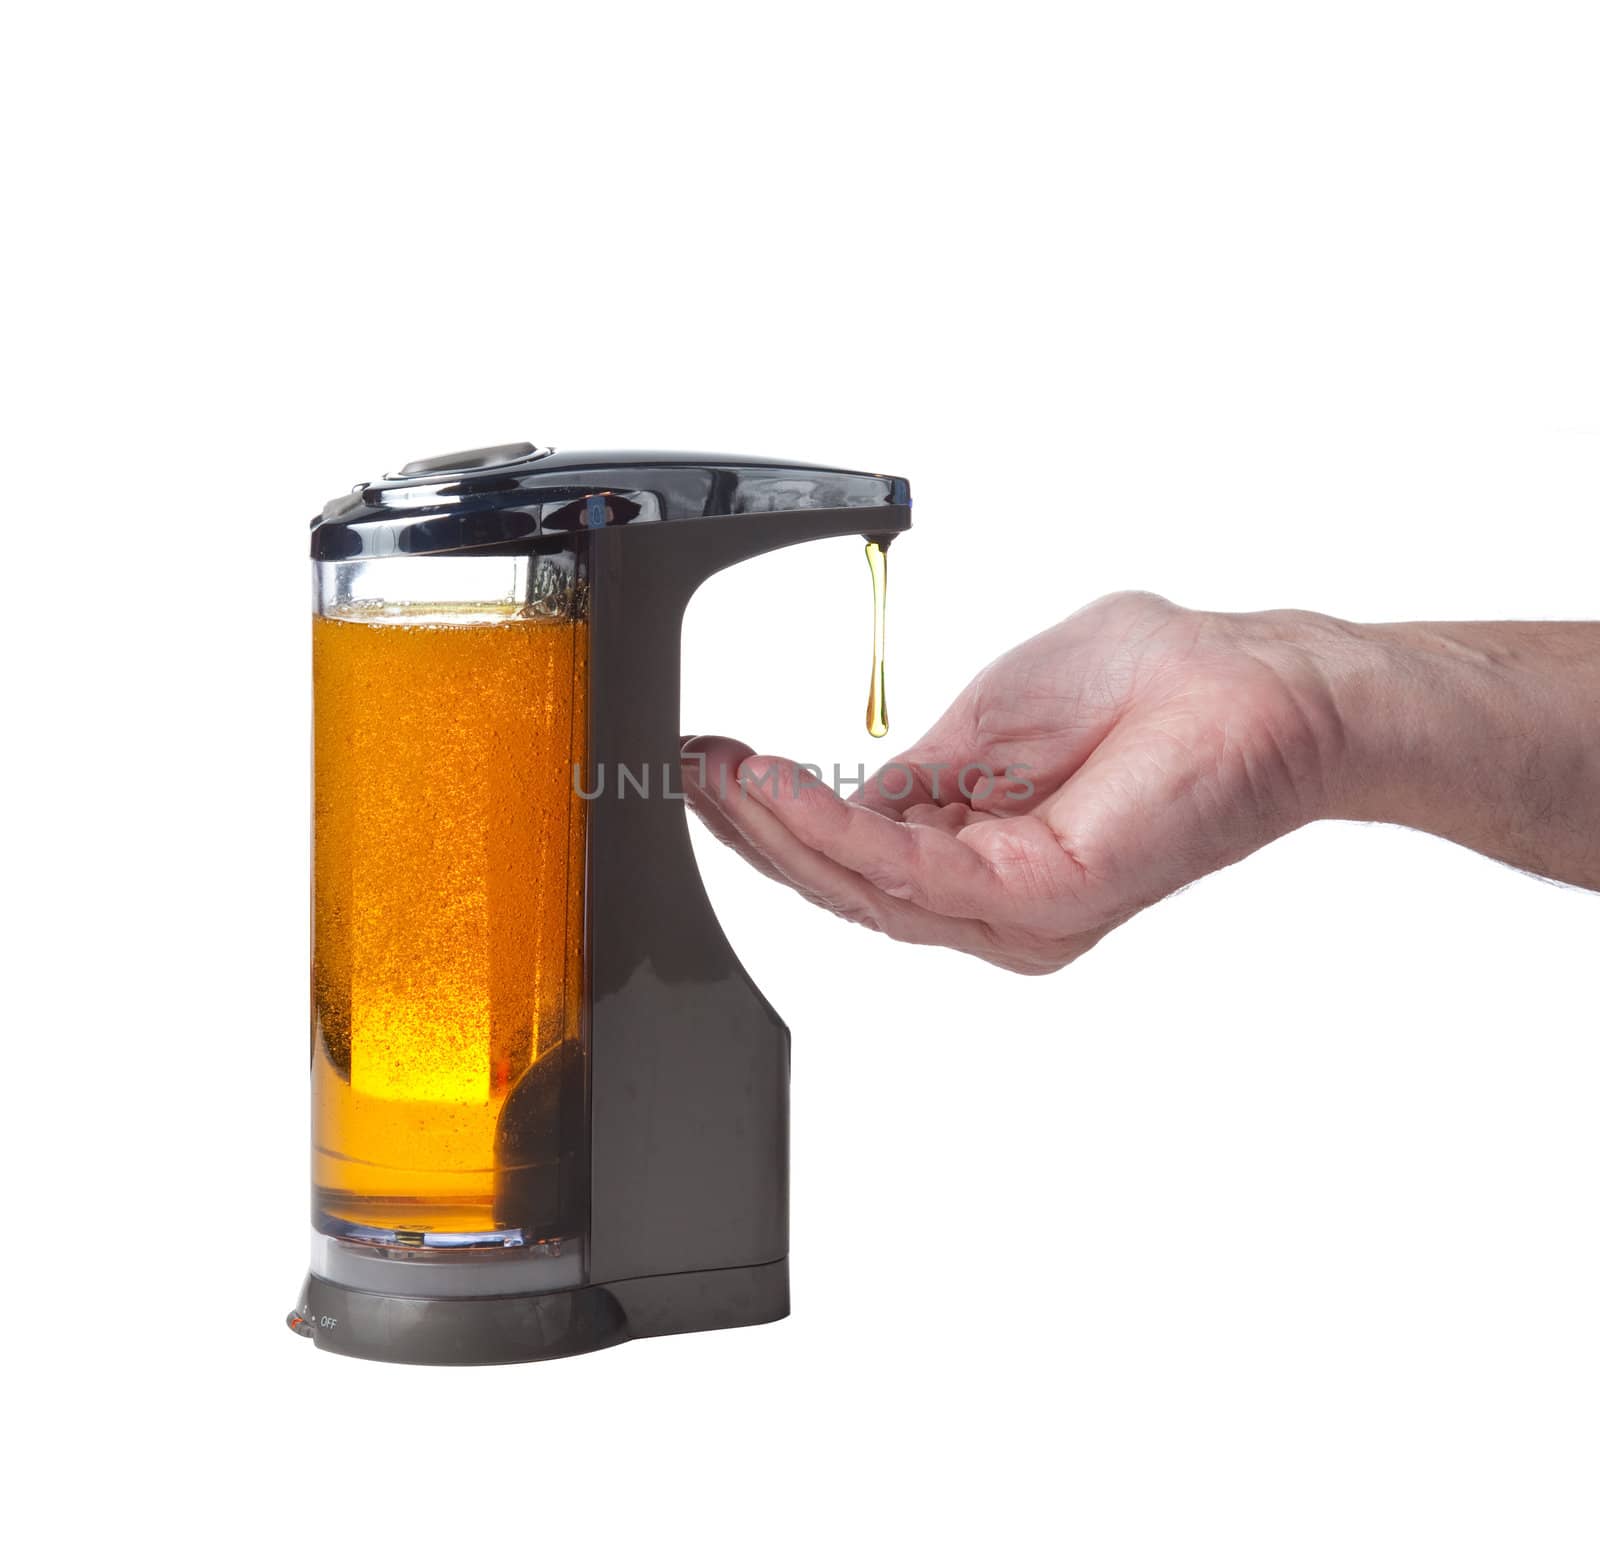 Soap or detergent being dispensed into male hand prior to hand washing